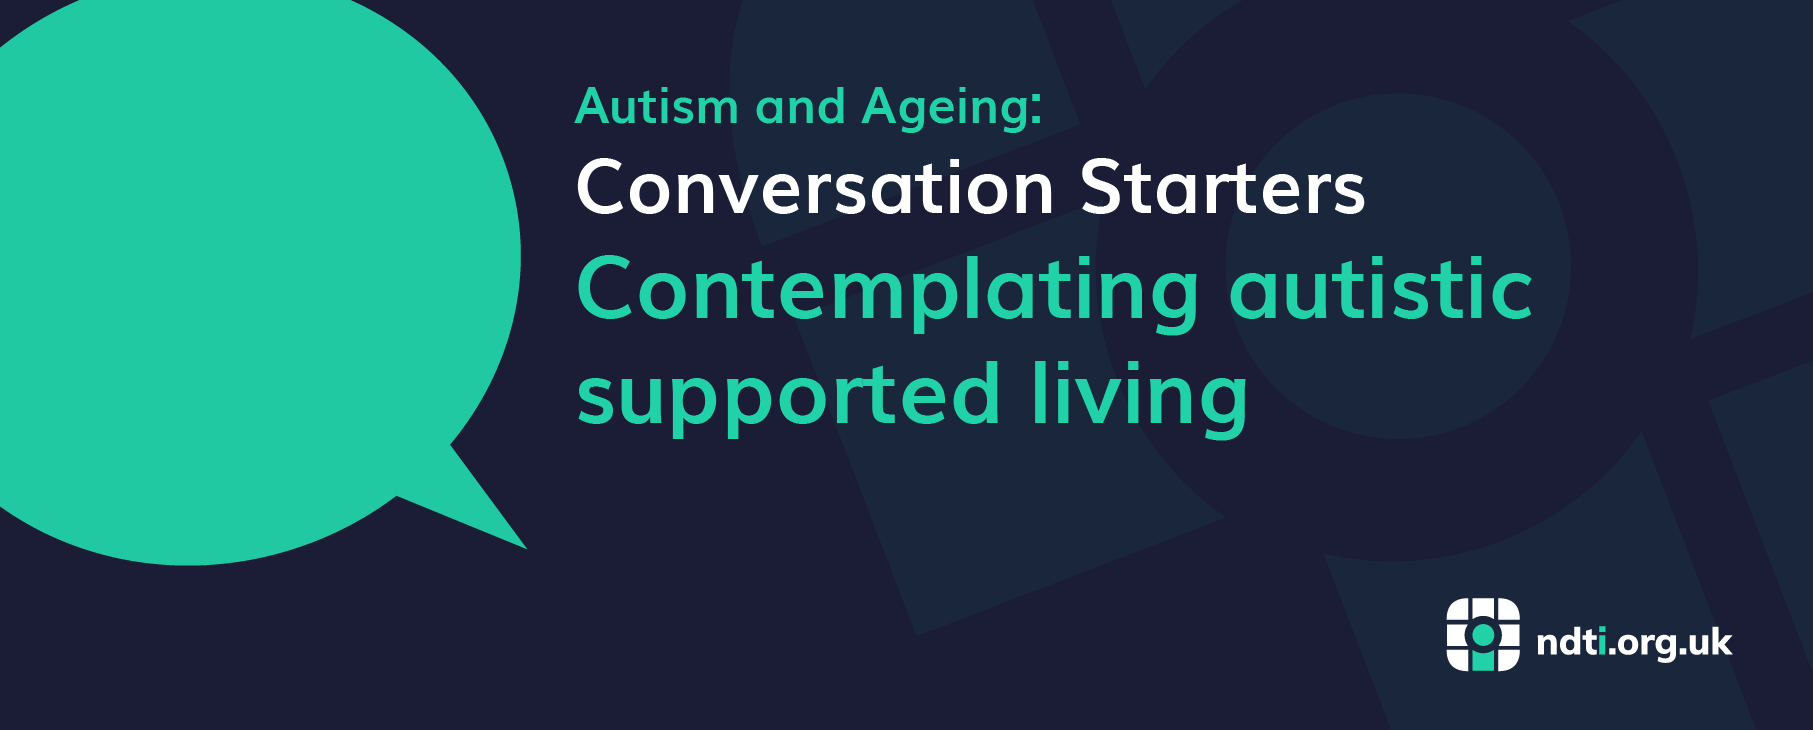 Contemplating autistic supported living 01